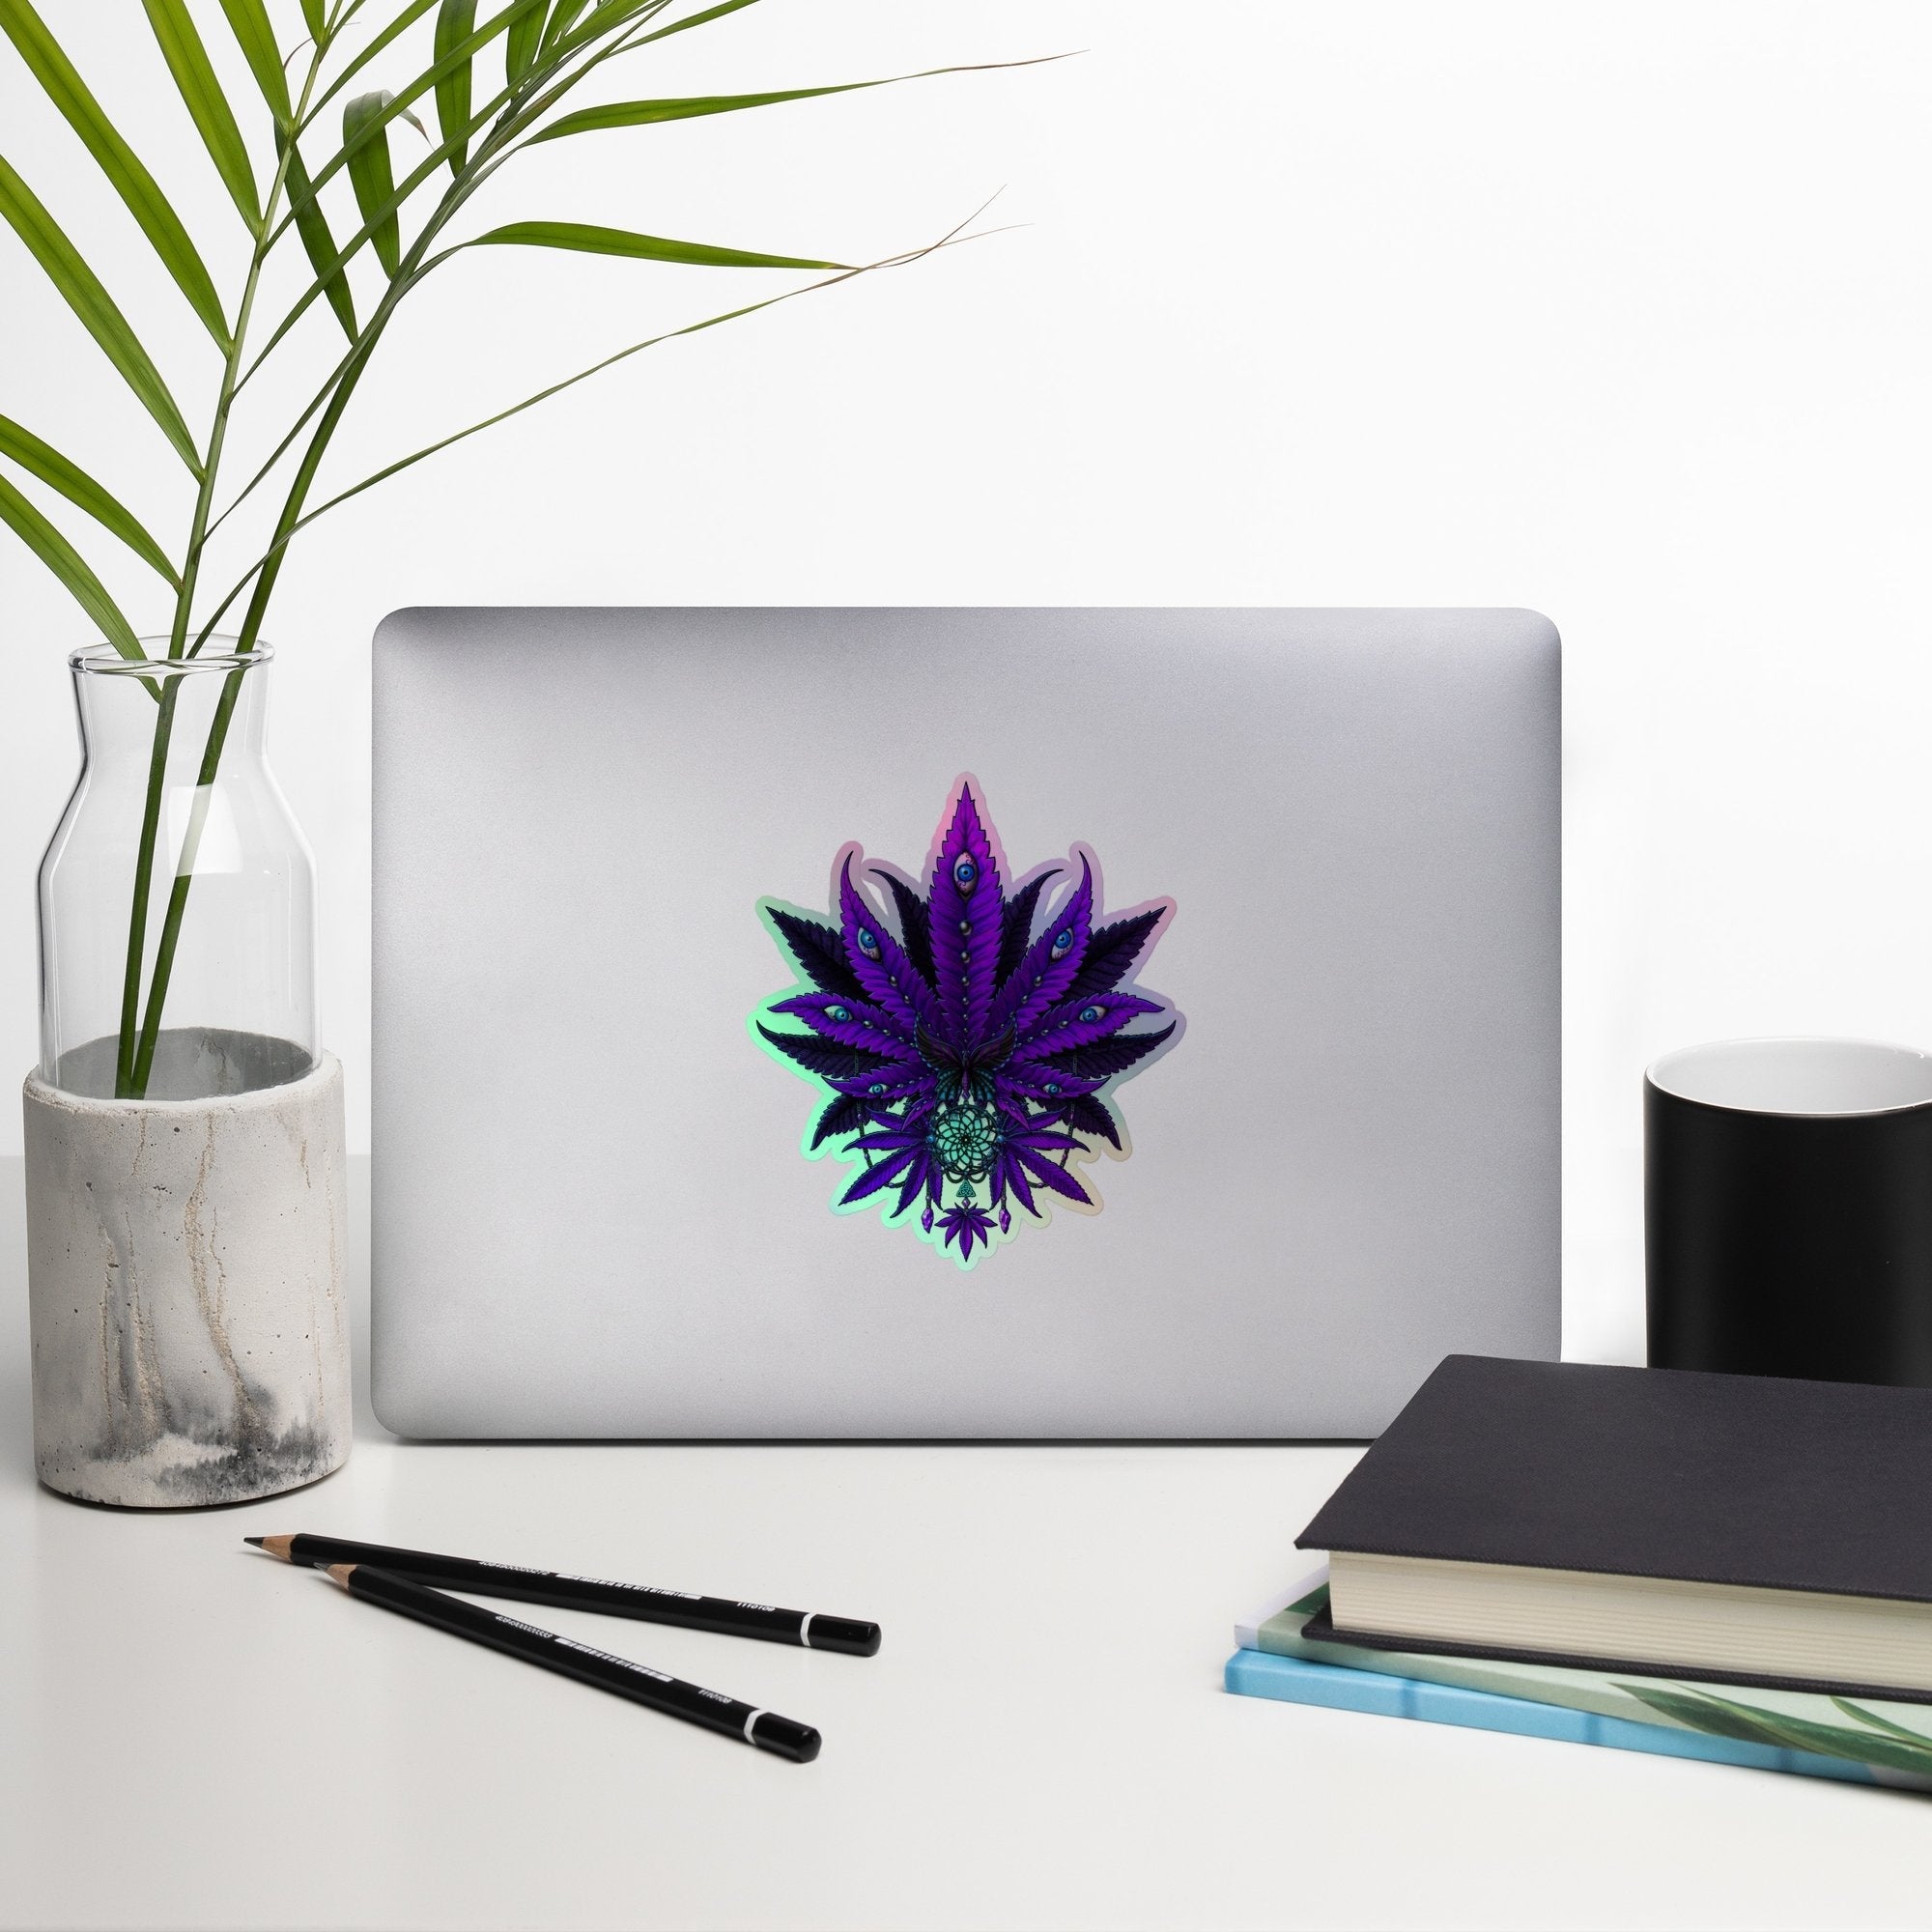 Holographic Cannabis Stickers, Weed Decal, Colorful Pot Leaf Vinyl, Small 420 Gift - Abysm Internal